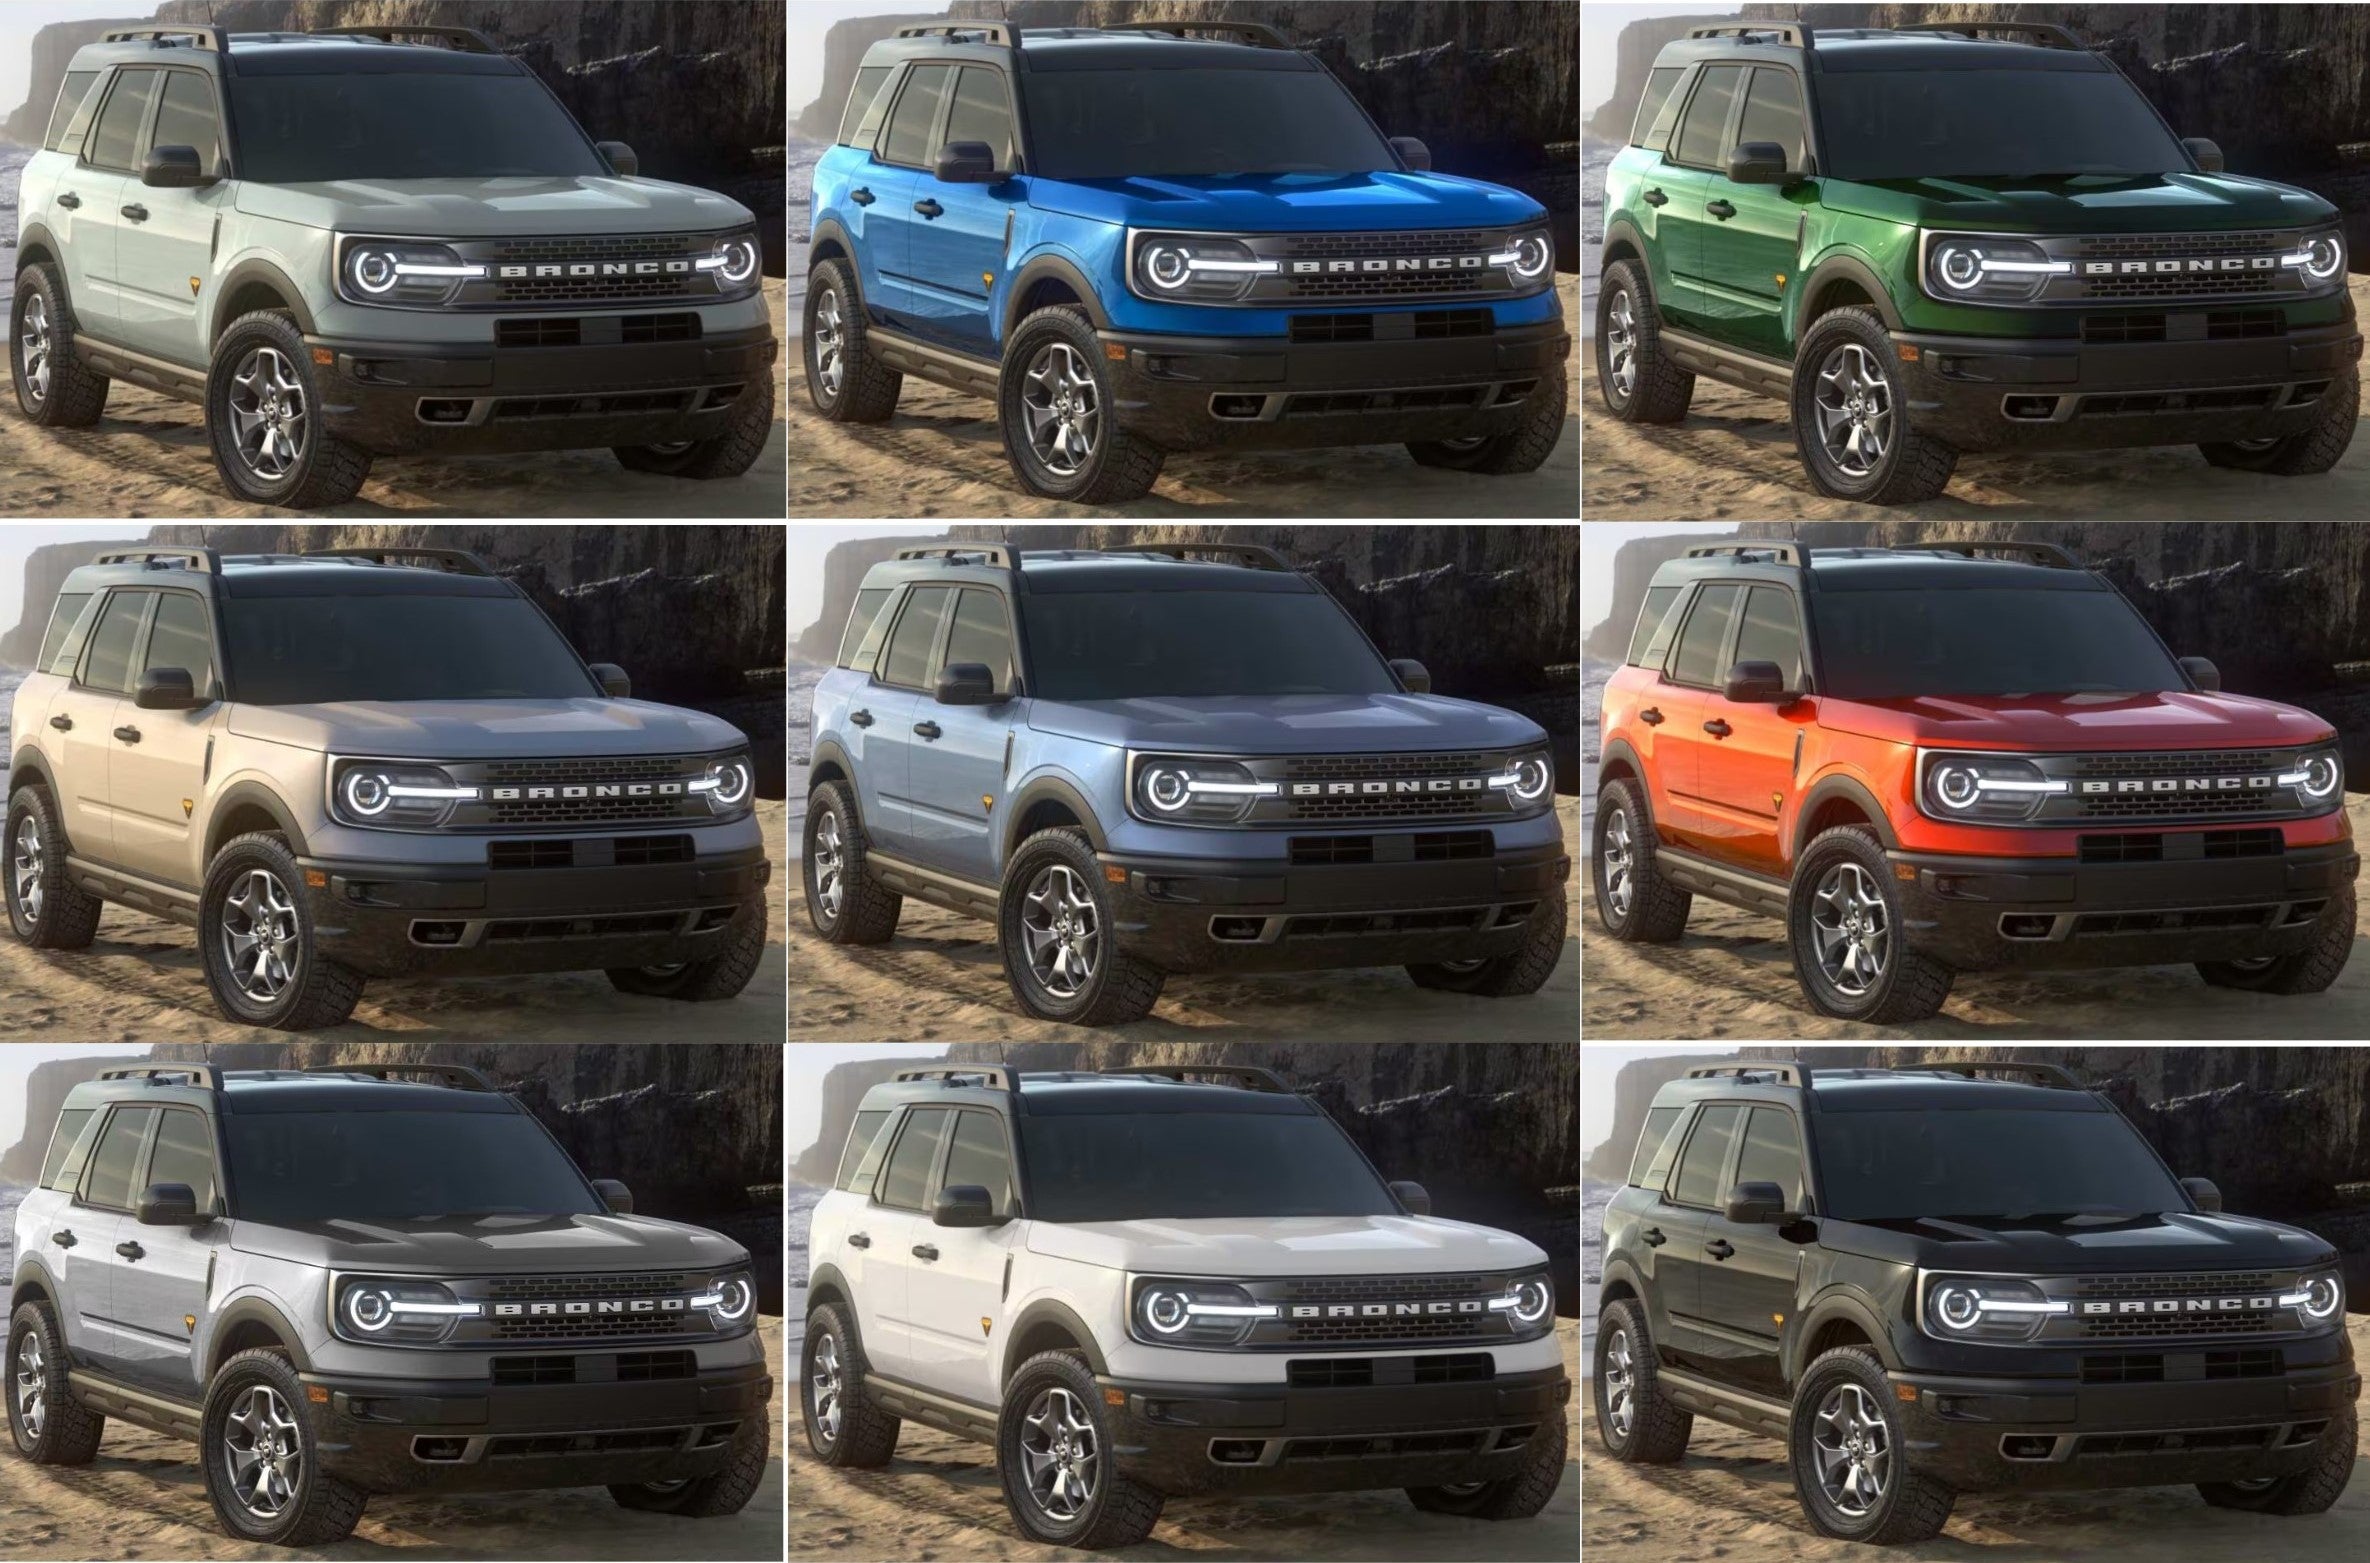 a collage of 9 suvs showing different exterior colors